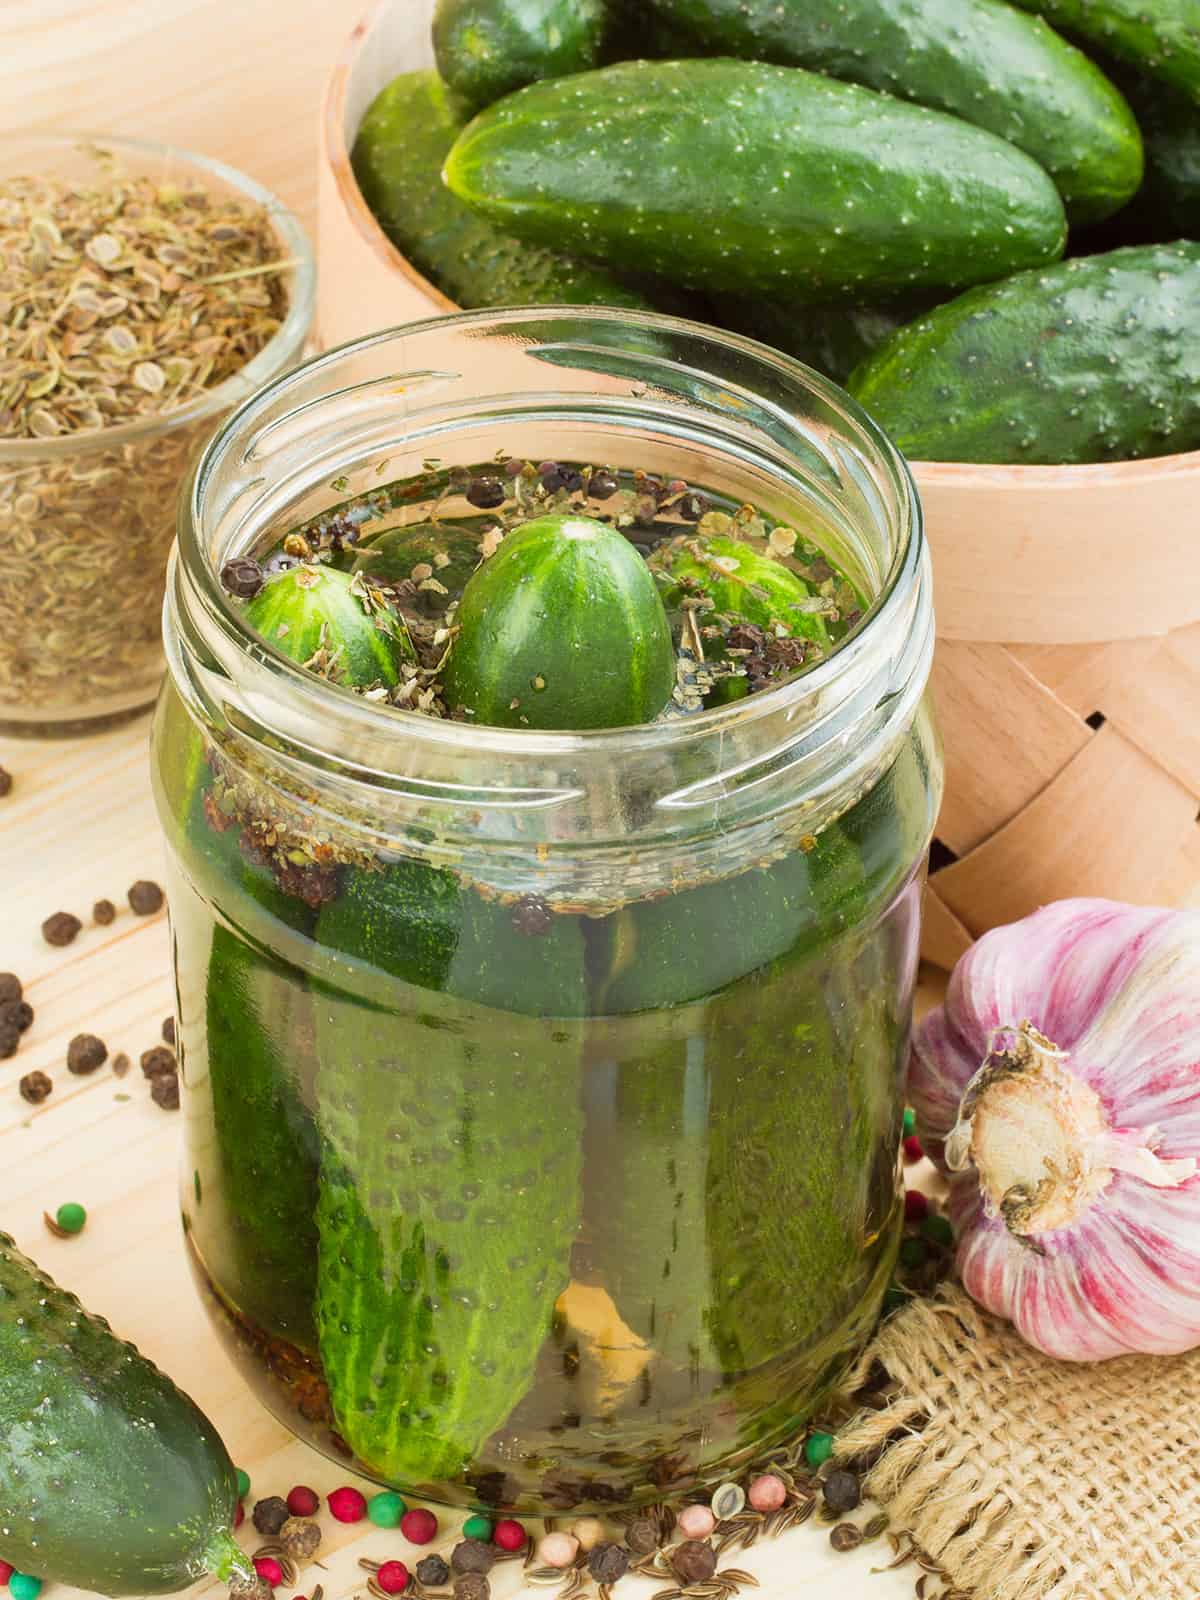 Pickling cucumbers, peppercorns, garlic and pickling spices in a salt brine filled glass jar and atop an unfinished wood table.